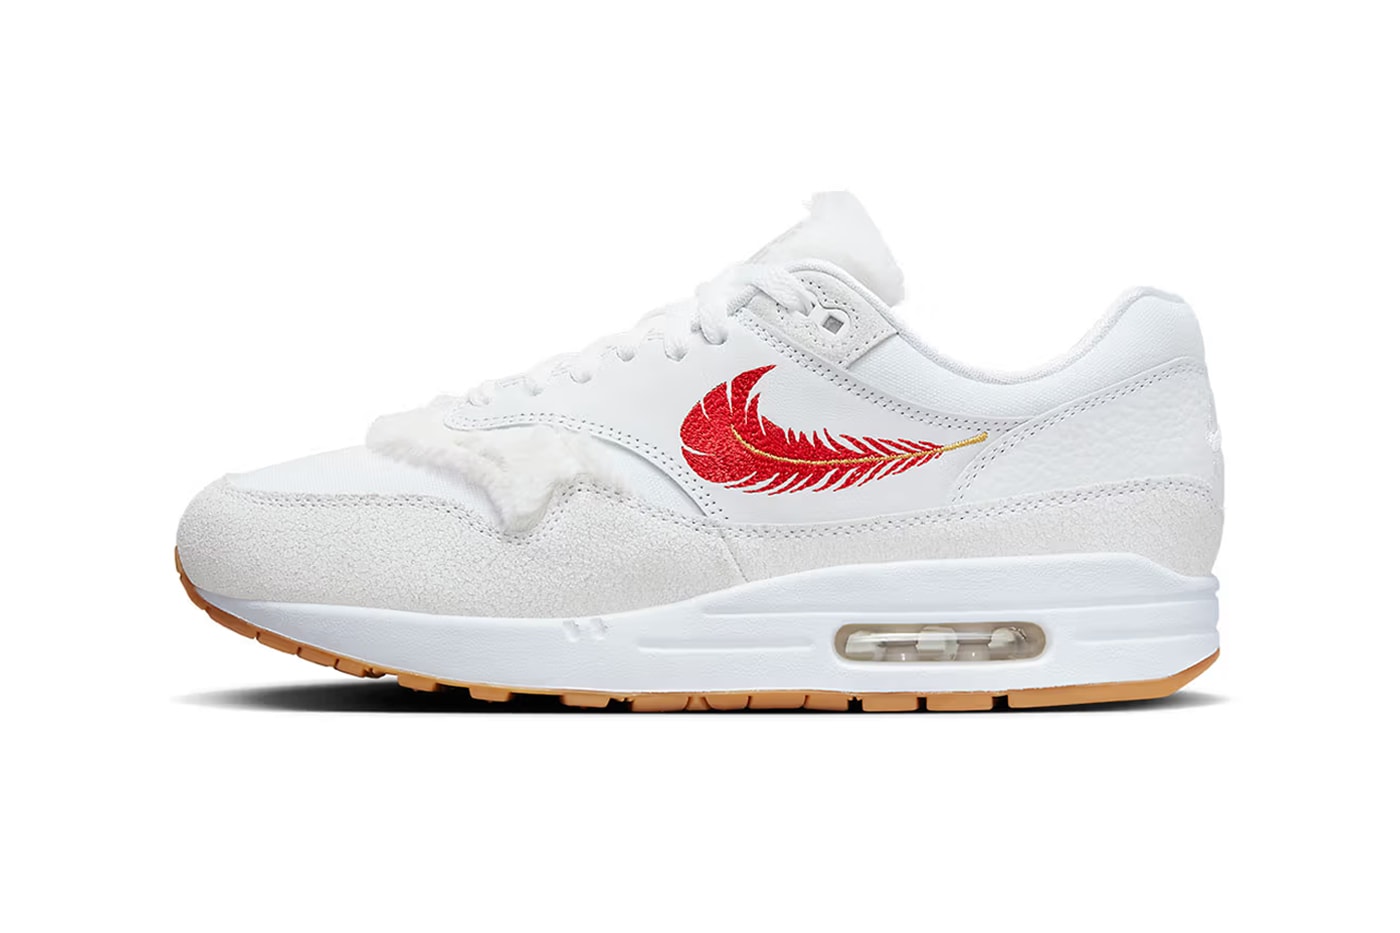 nike air max 1 the bay FJ4451 100 release date info store list buying guide photos price 